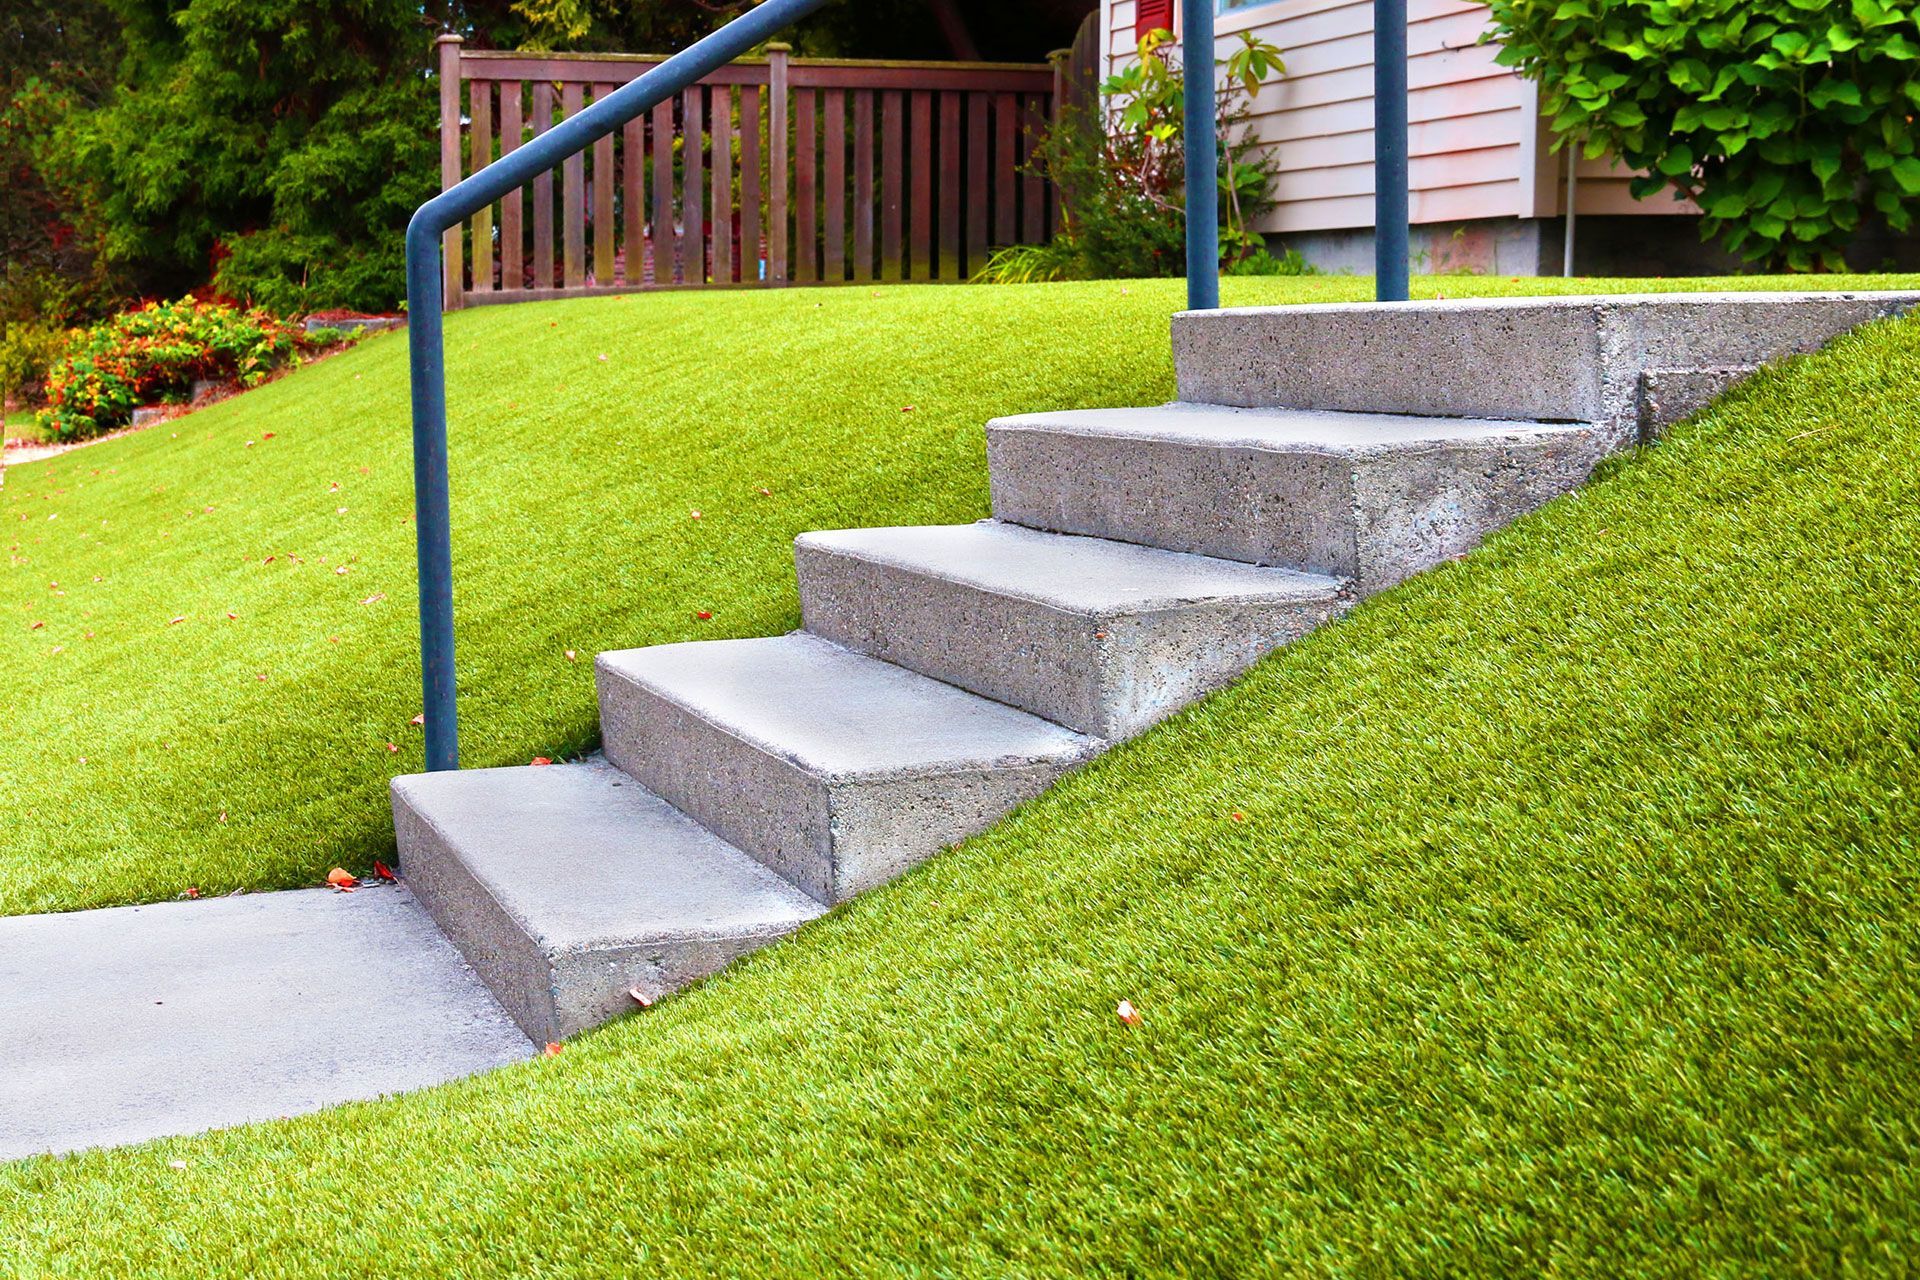 a set of stairs leading up to a house on a grassy hillside